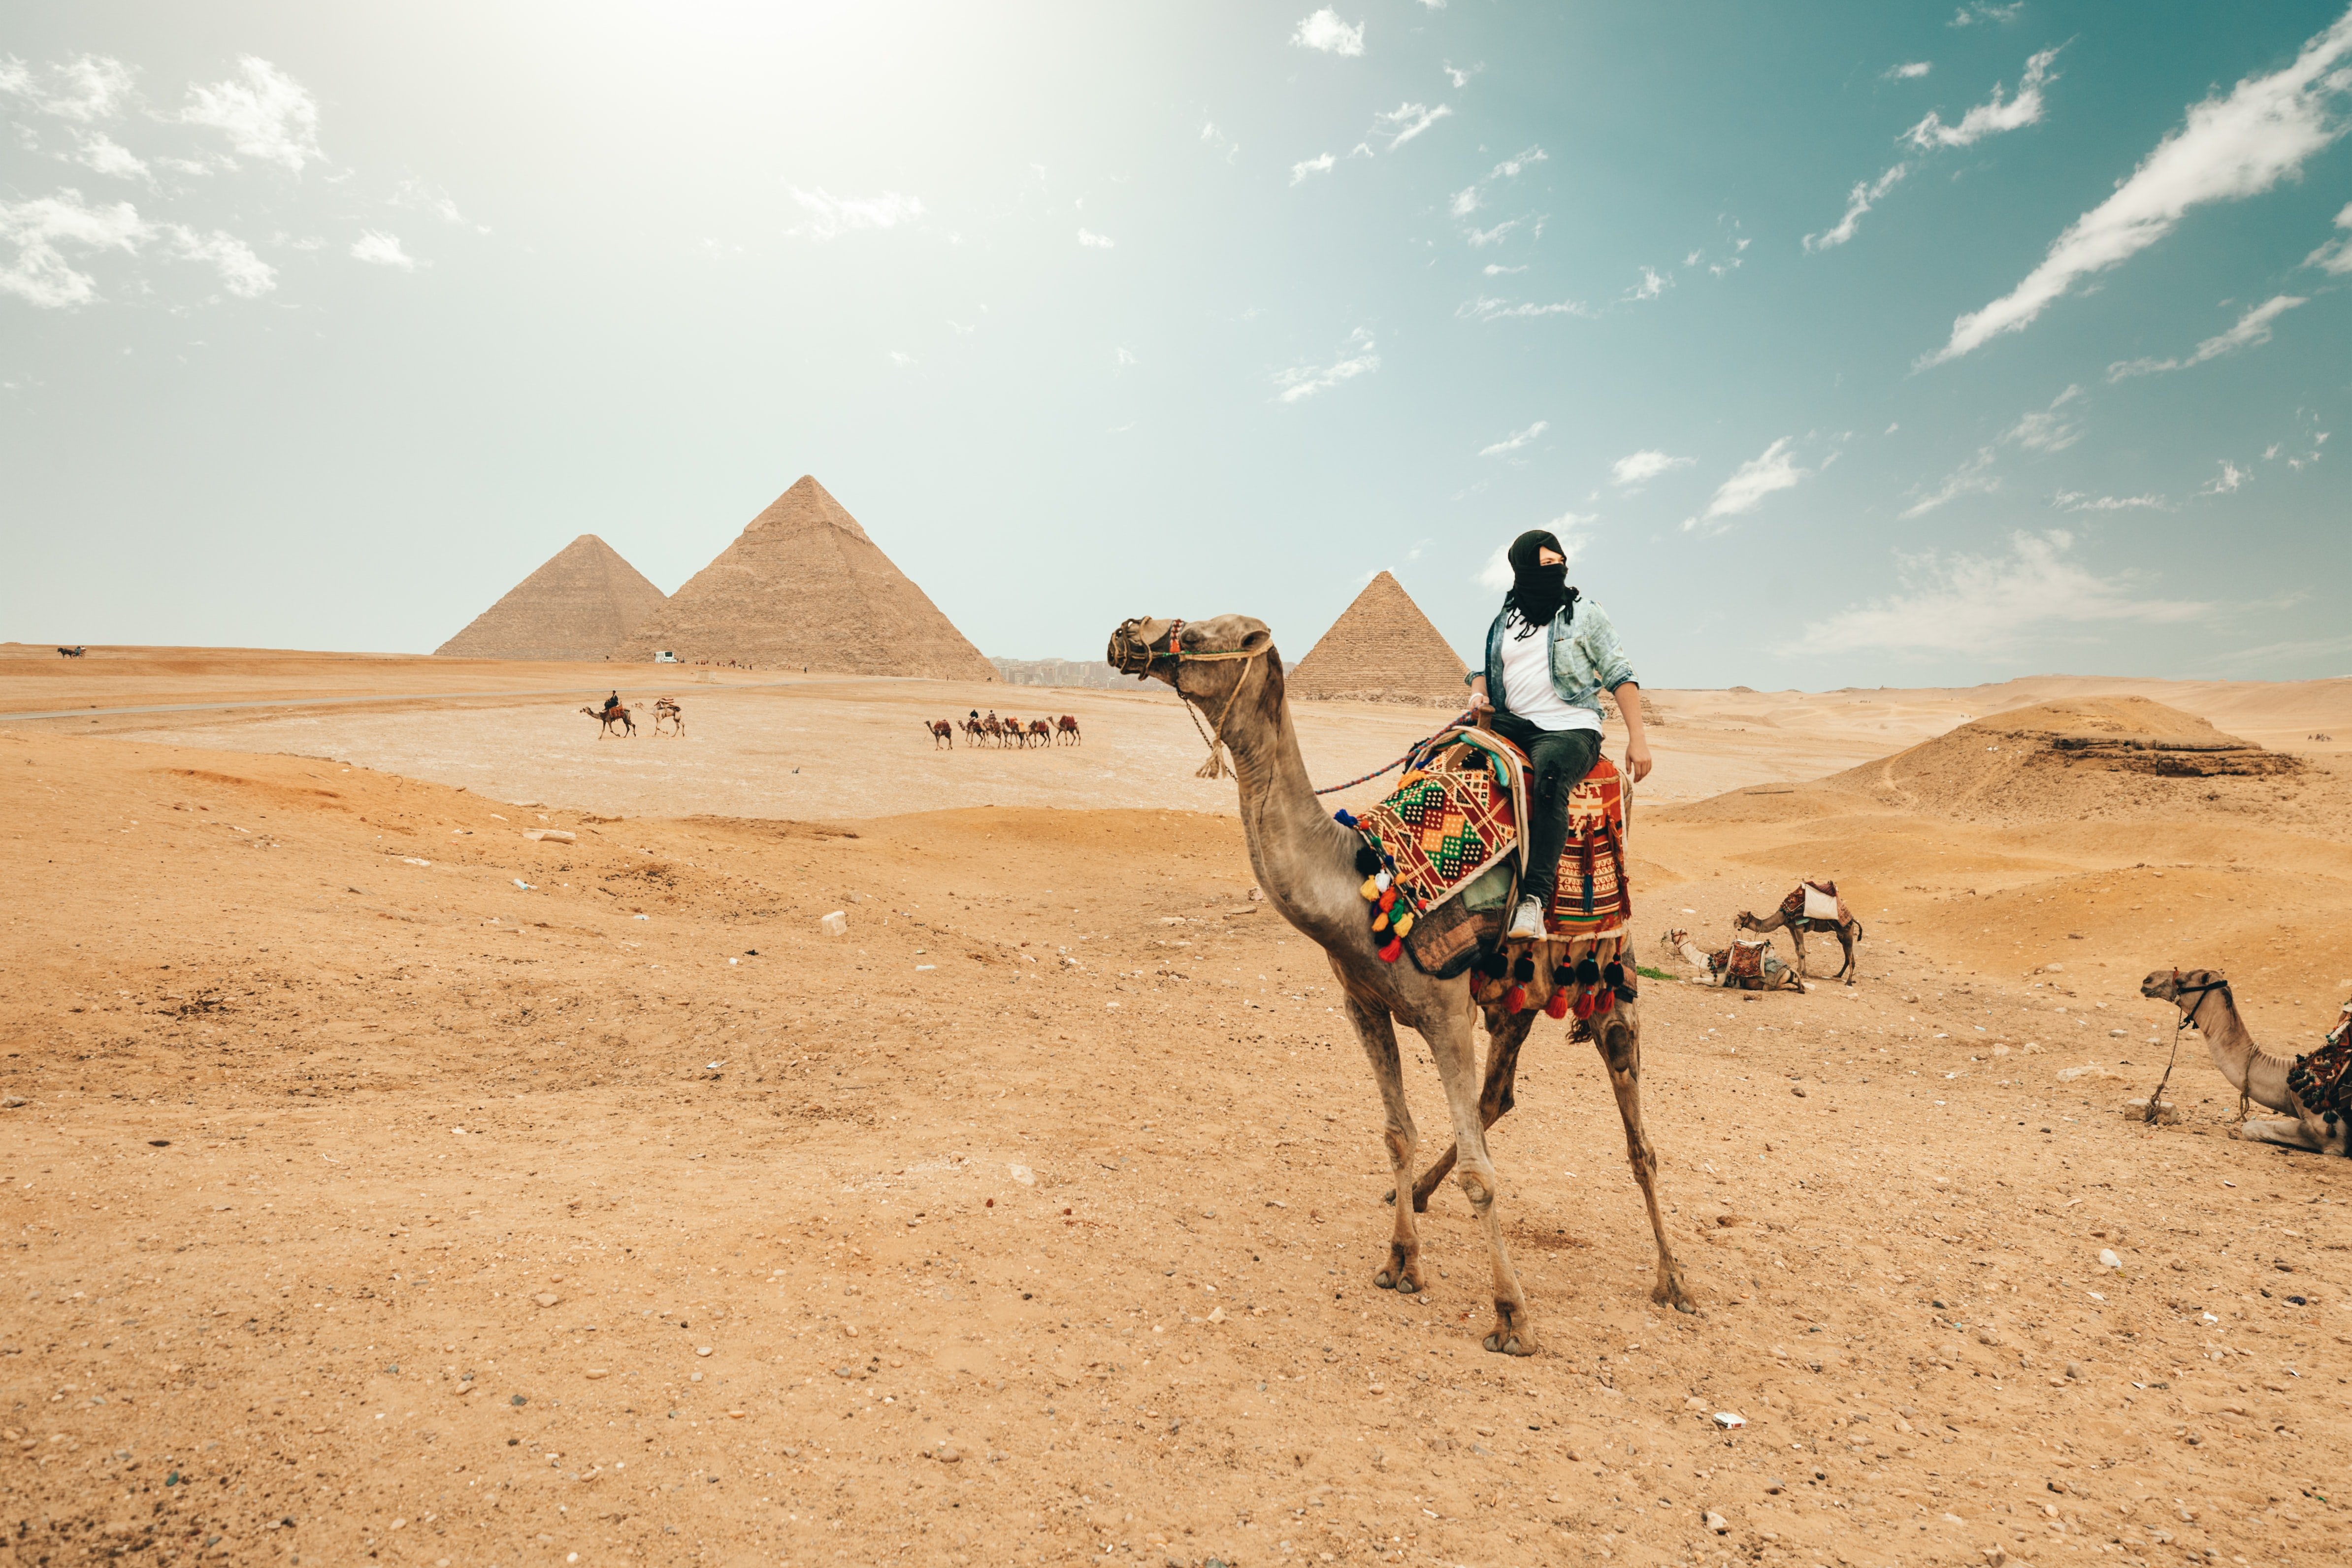 Have an unusual start into the new year on a trip to Egypt.